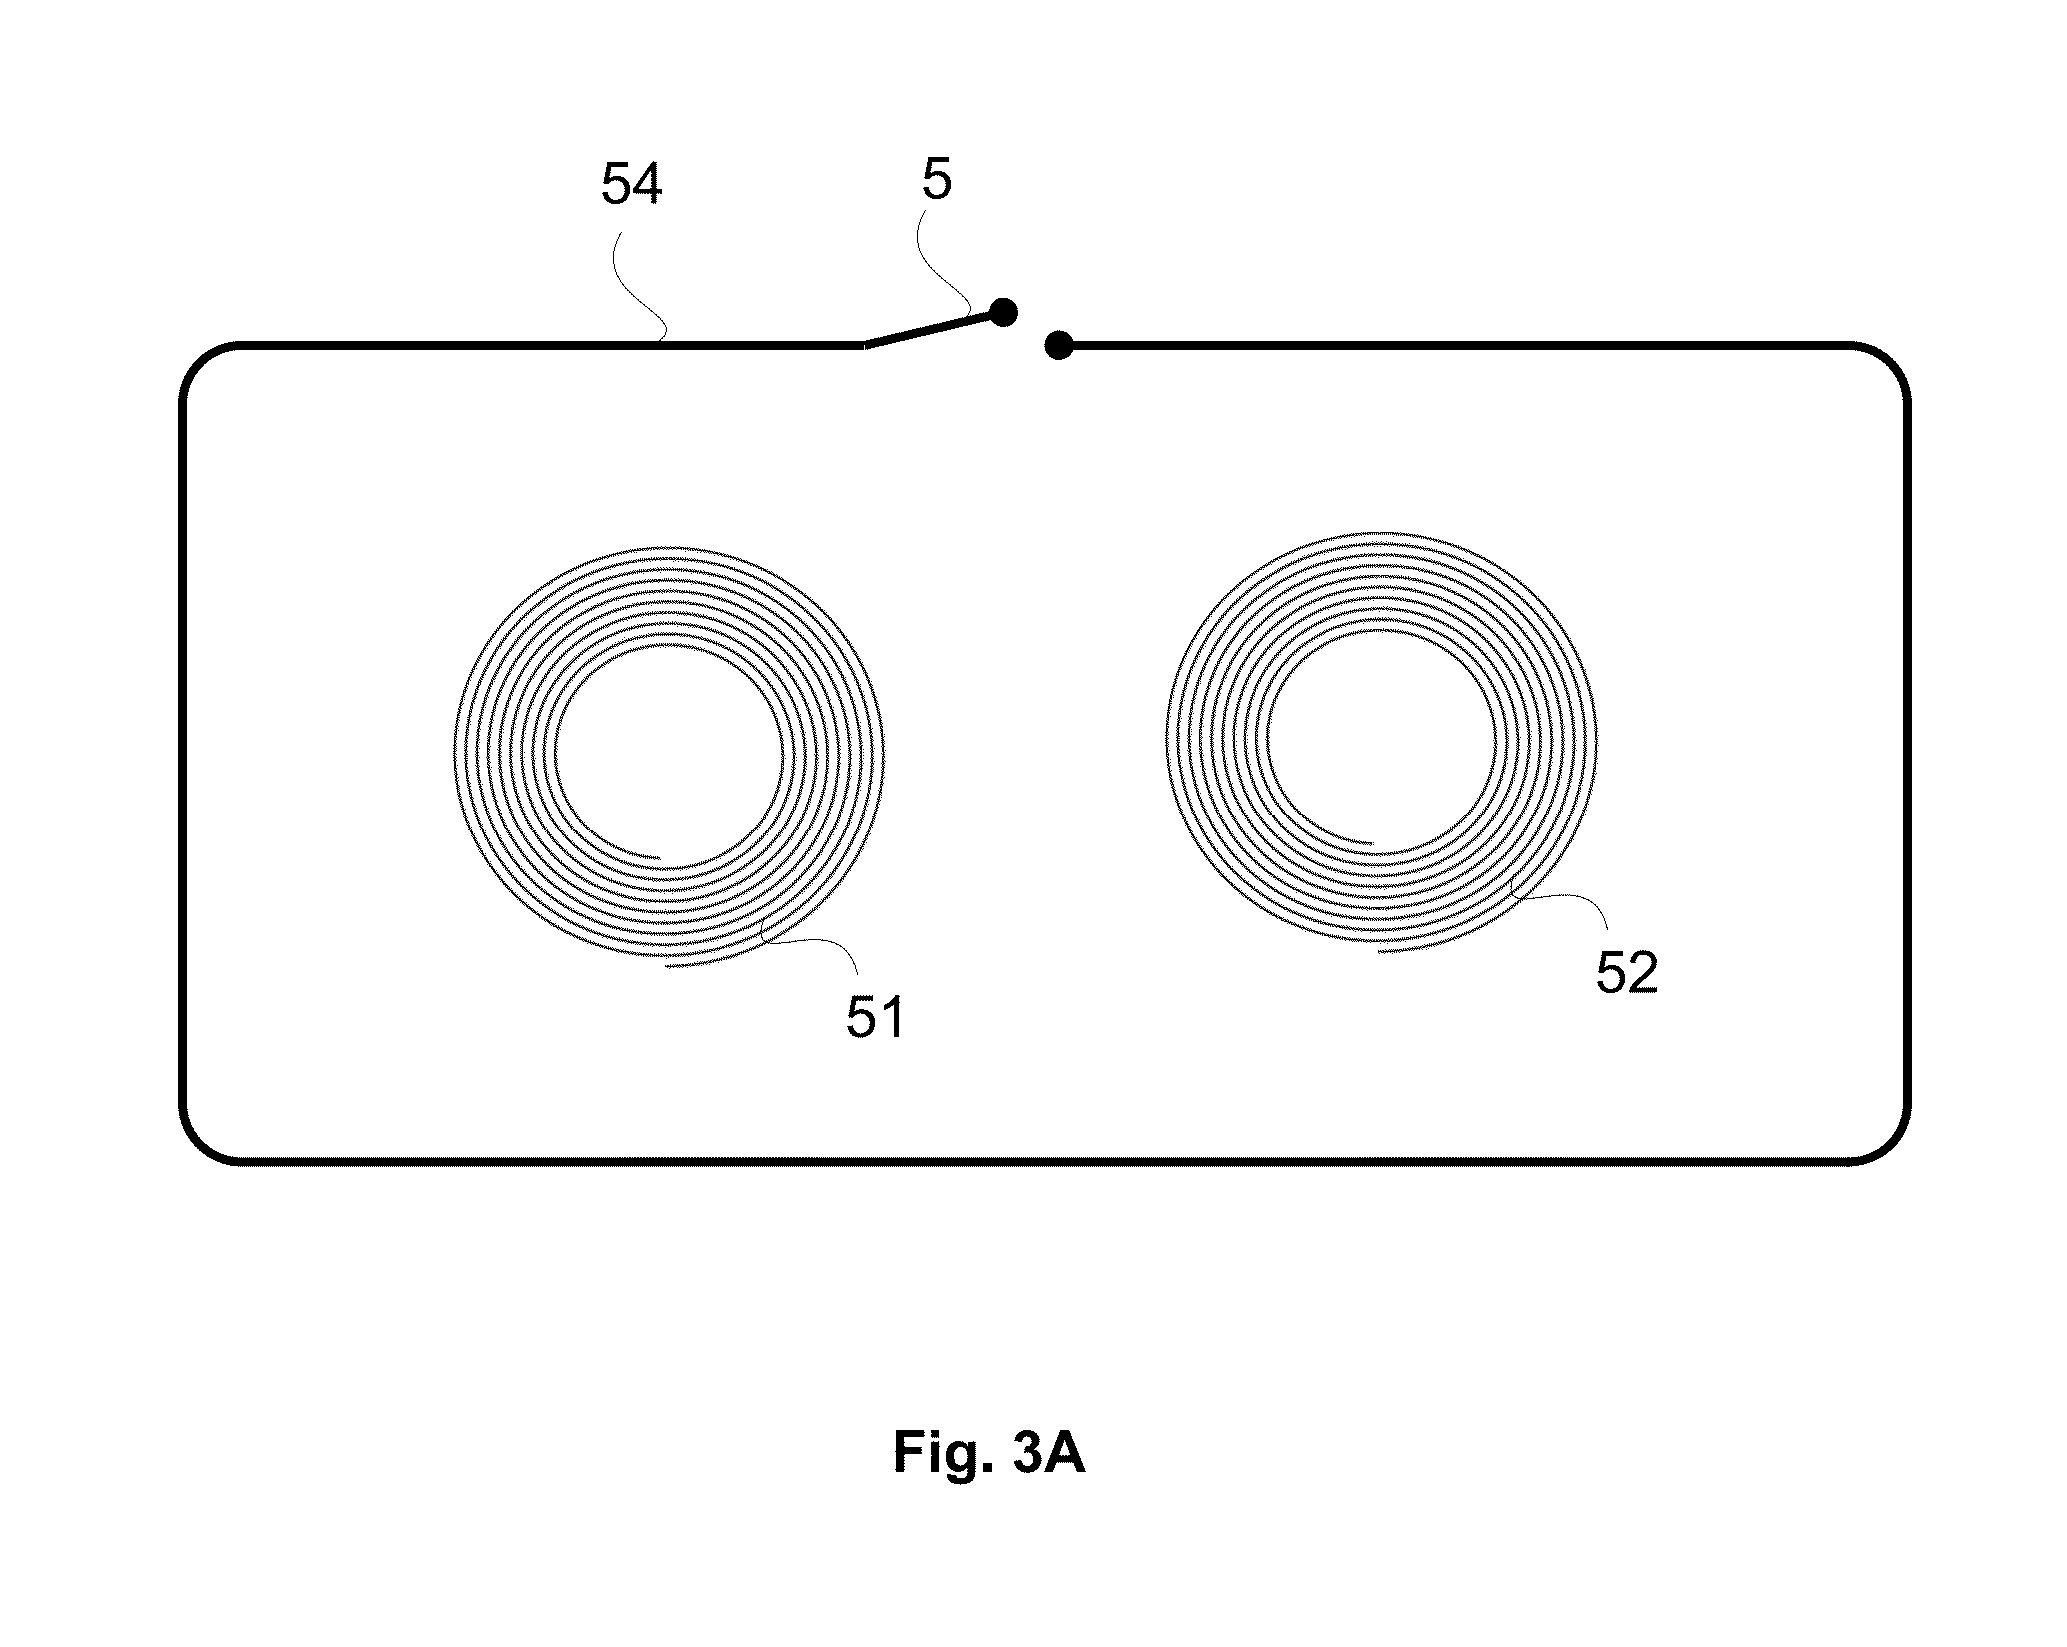 Method for monitoring the integrity of an eddy current inspection channel